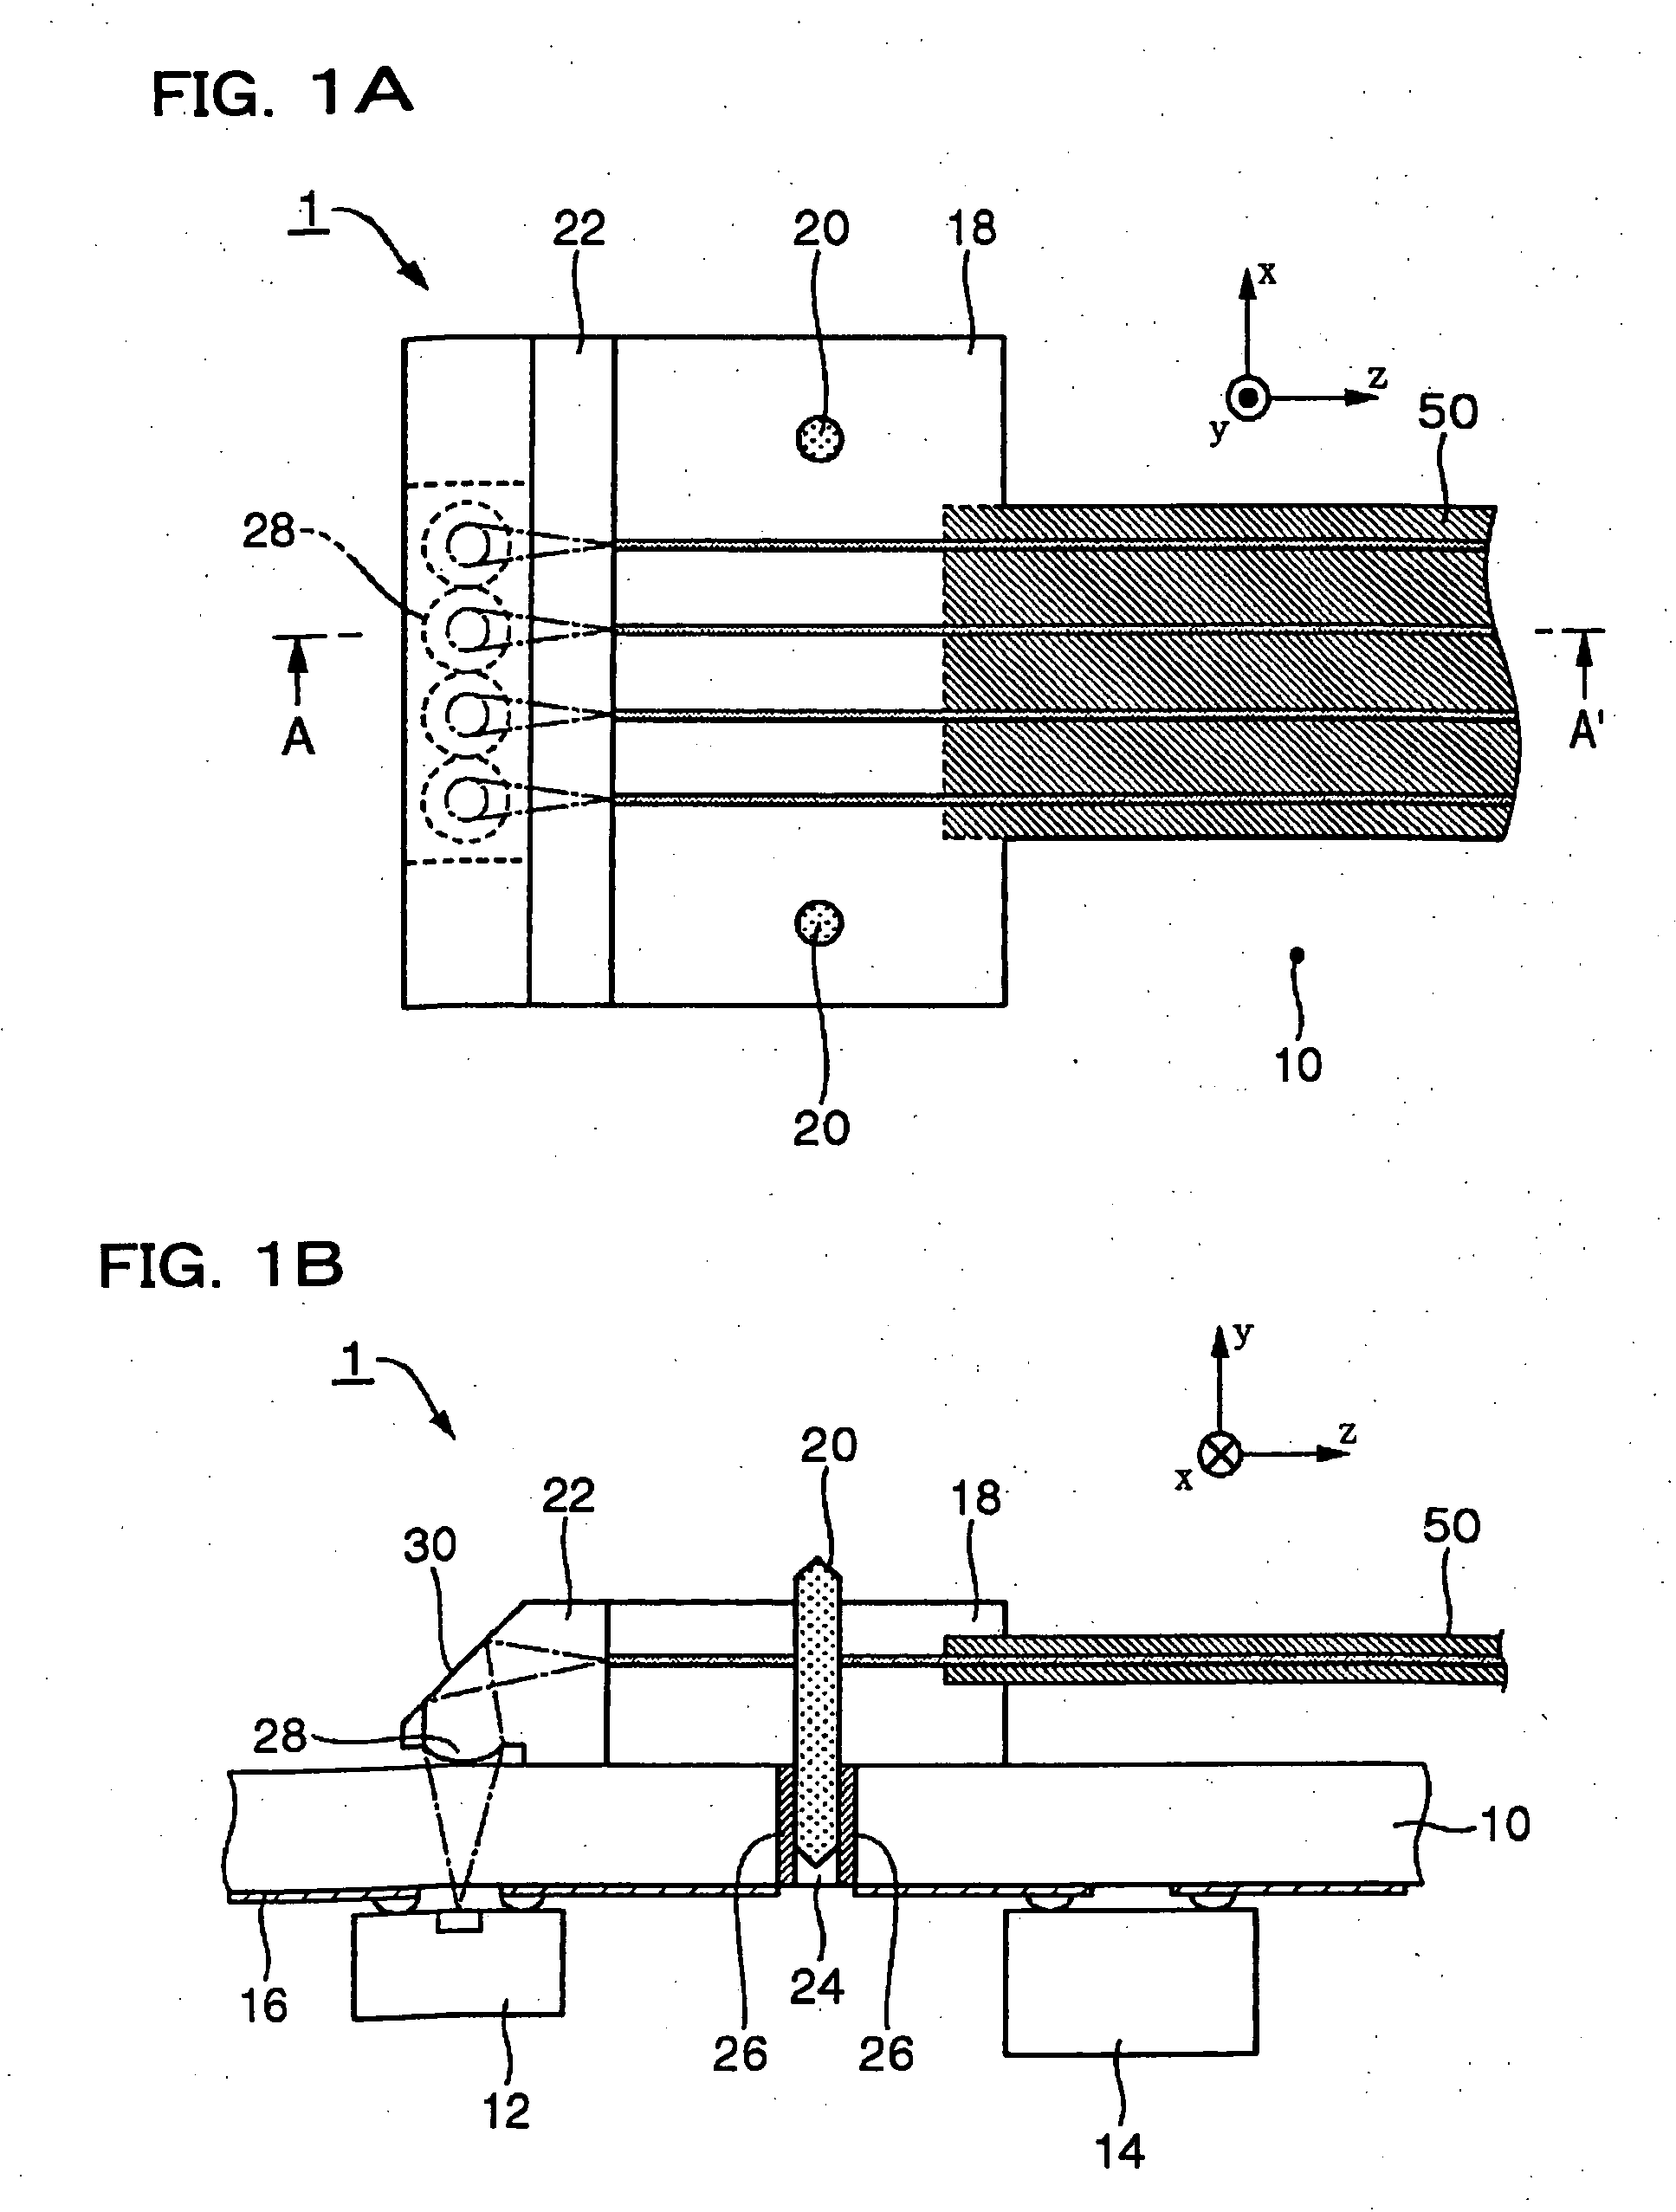 Optical module and method of manufacturing the same, and hybrid integrated circuit, hybrid circuit board, electronic apparatus, opto-electricity mixed device, and method of manufacturing the same